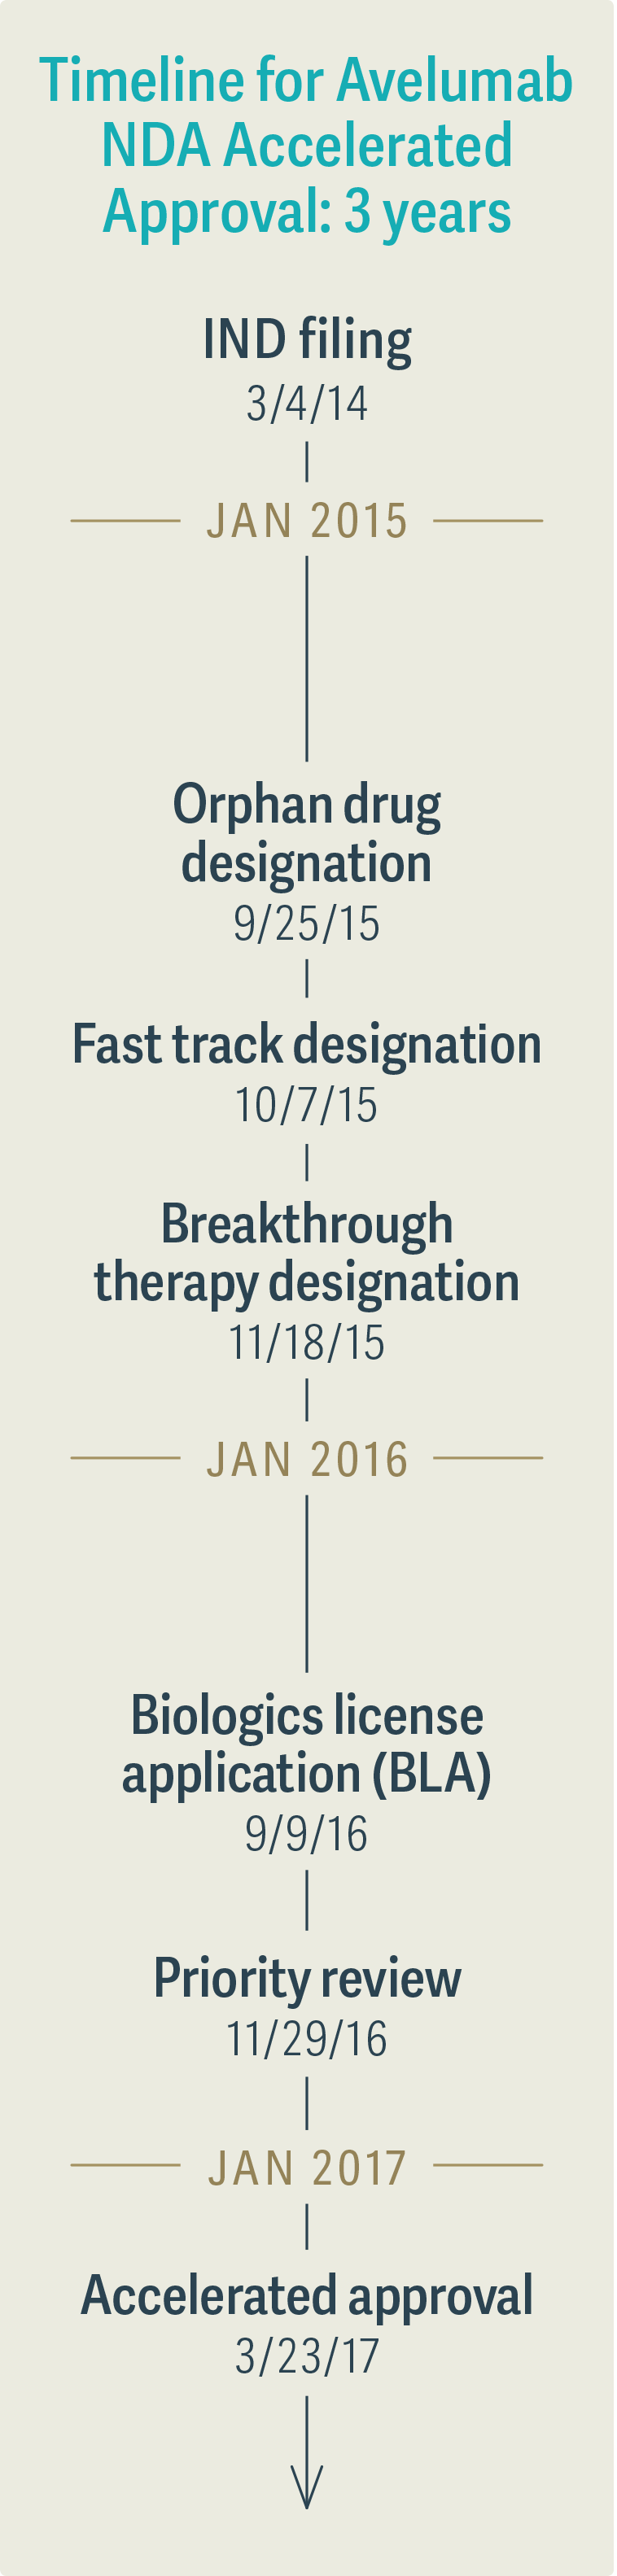 Timeline for Avelumab NDA Accelerated Approval: 3 years